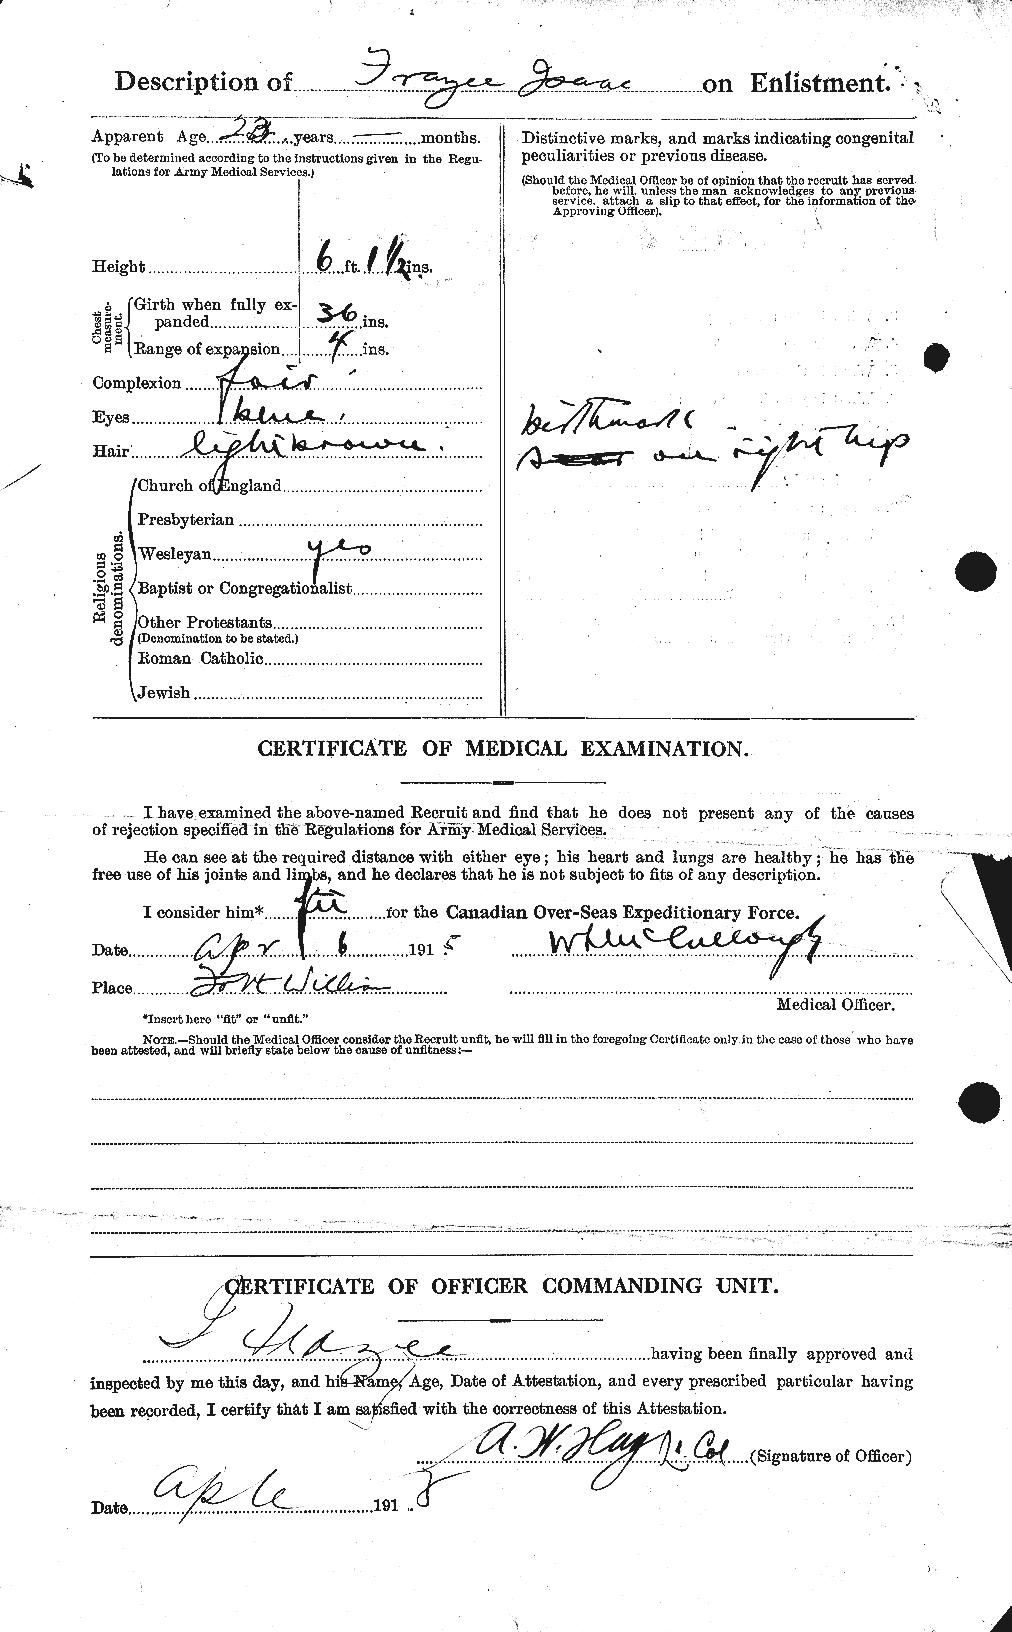 Personnel Records of the First World War - CEF 338438b